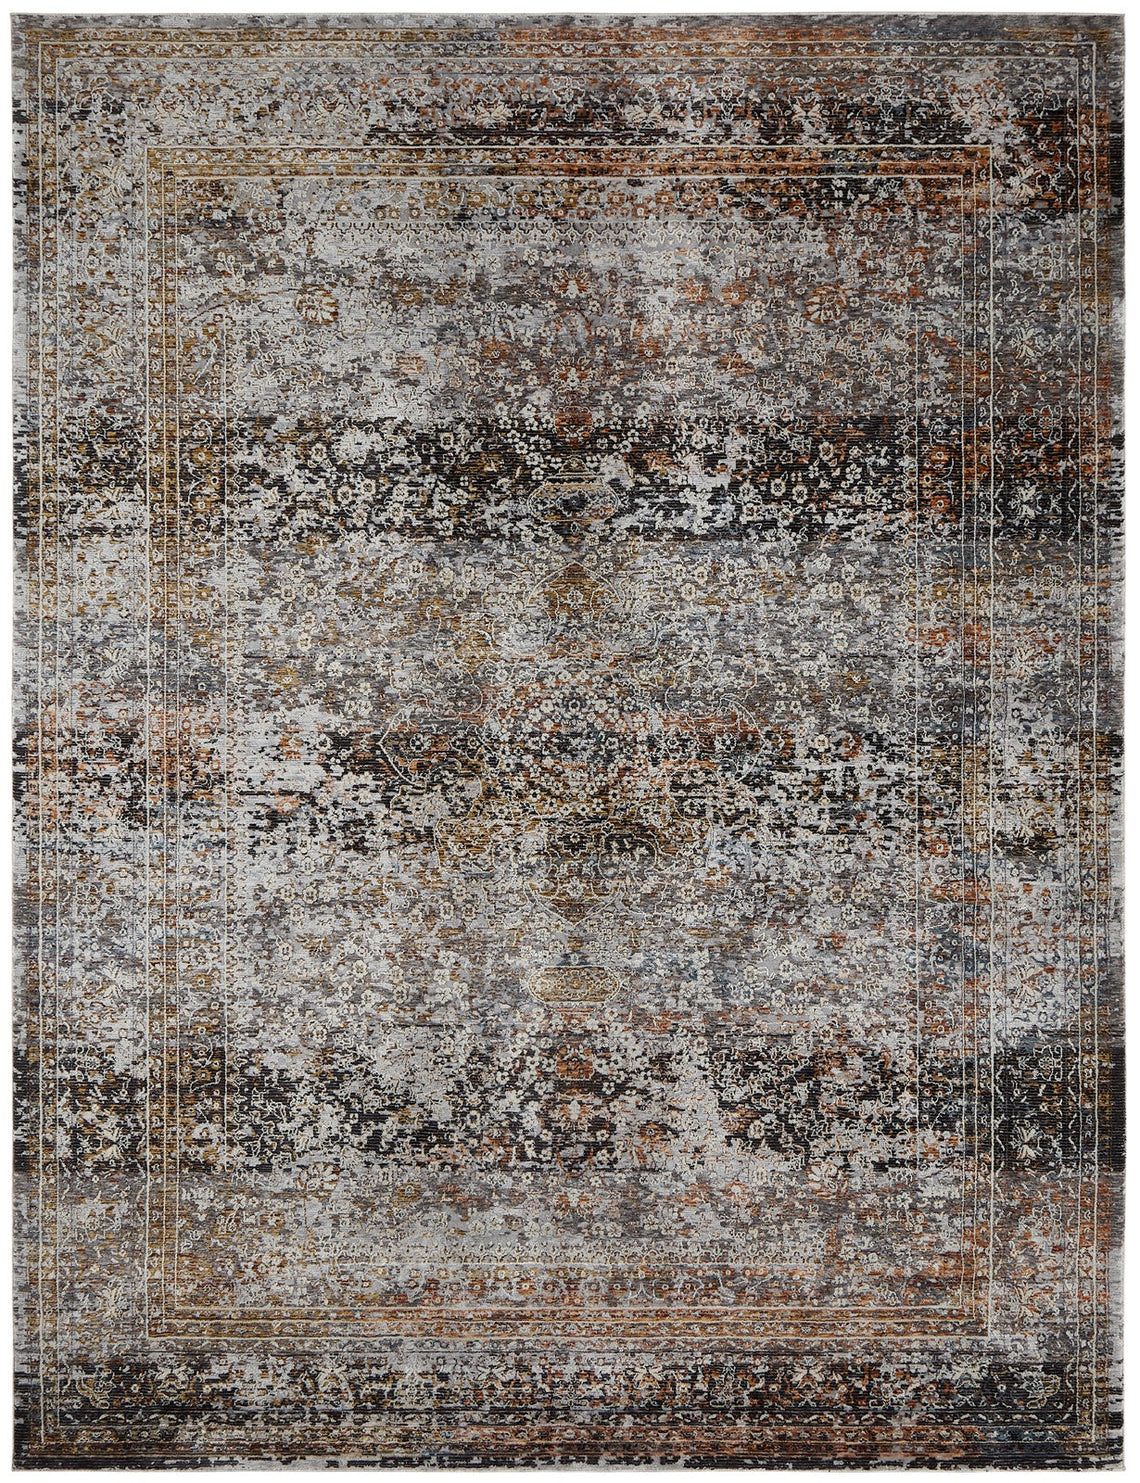 Camilla Greys/Browns 5 ft. 3 in. x 7 ft. 6 in. Area Rug